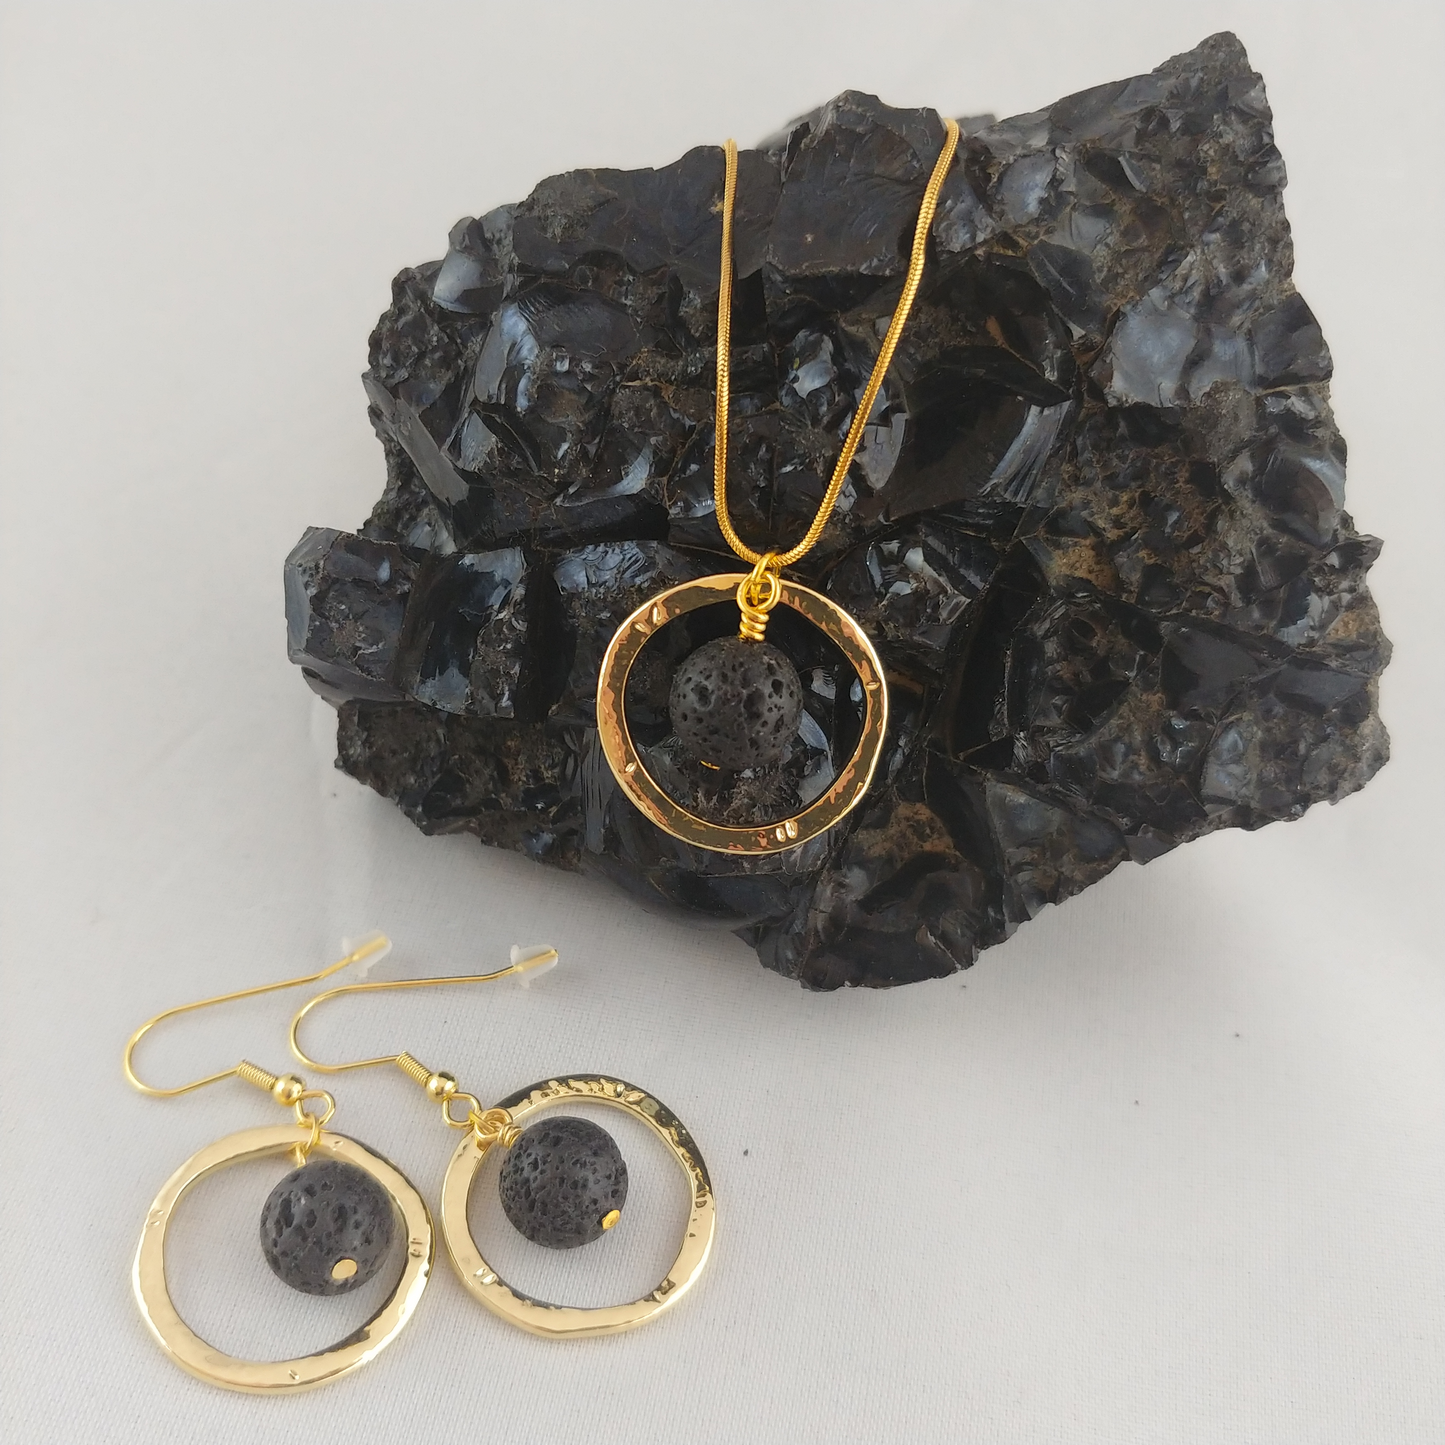 Set of golden colored Jewelry. A golden colored necklace with a golden colored ring with a lava stone in the middle sitting on a black Obsidian display. On the bottom left earrings with golden rings and in the middle lava beads.